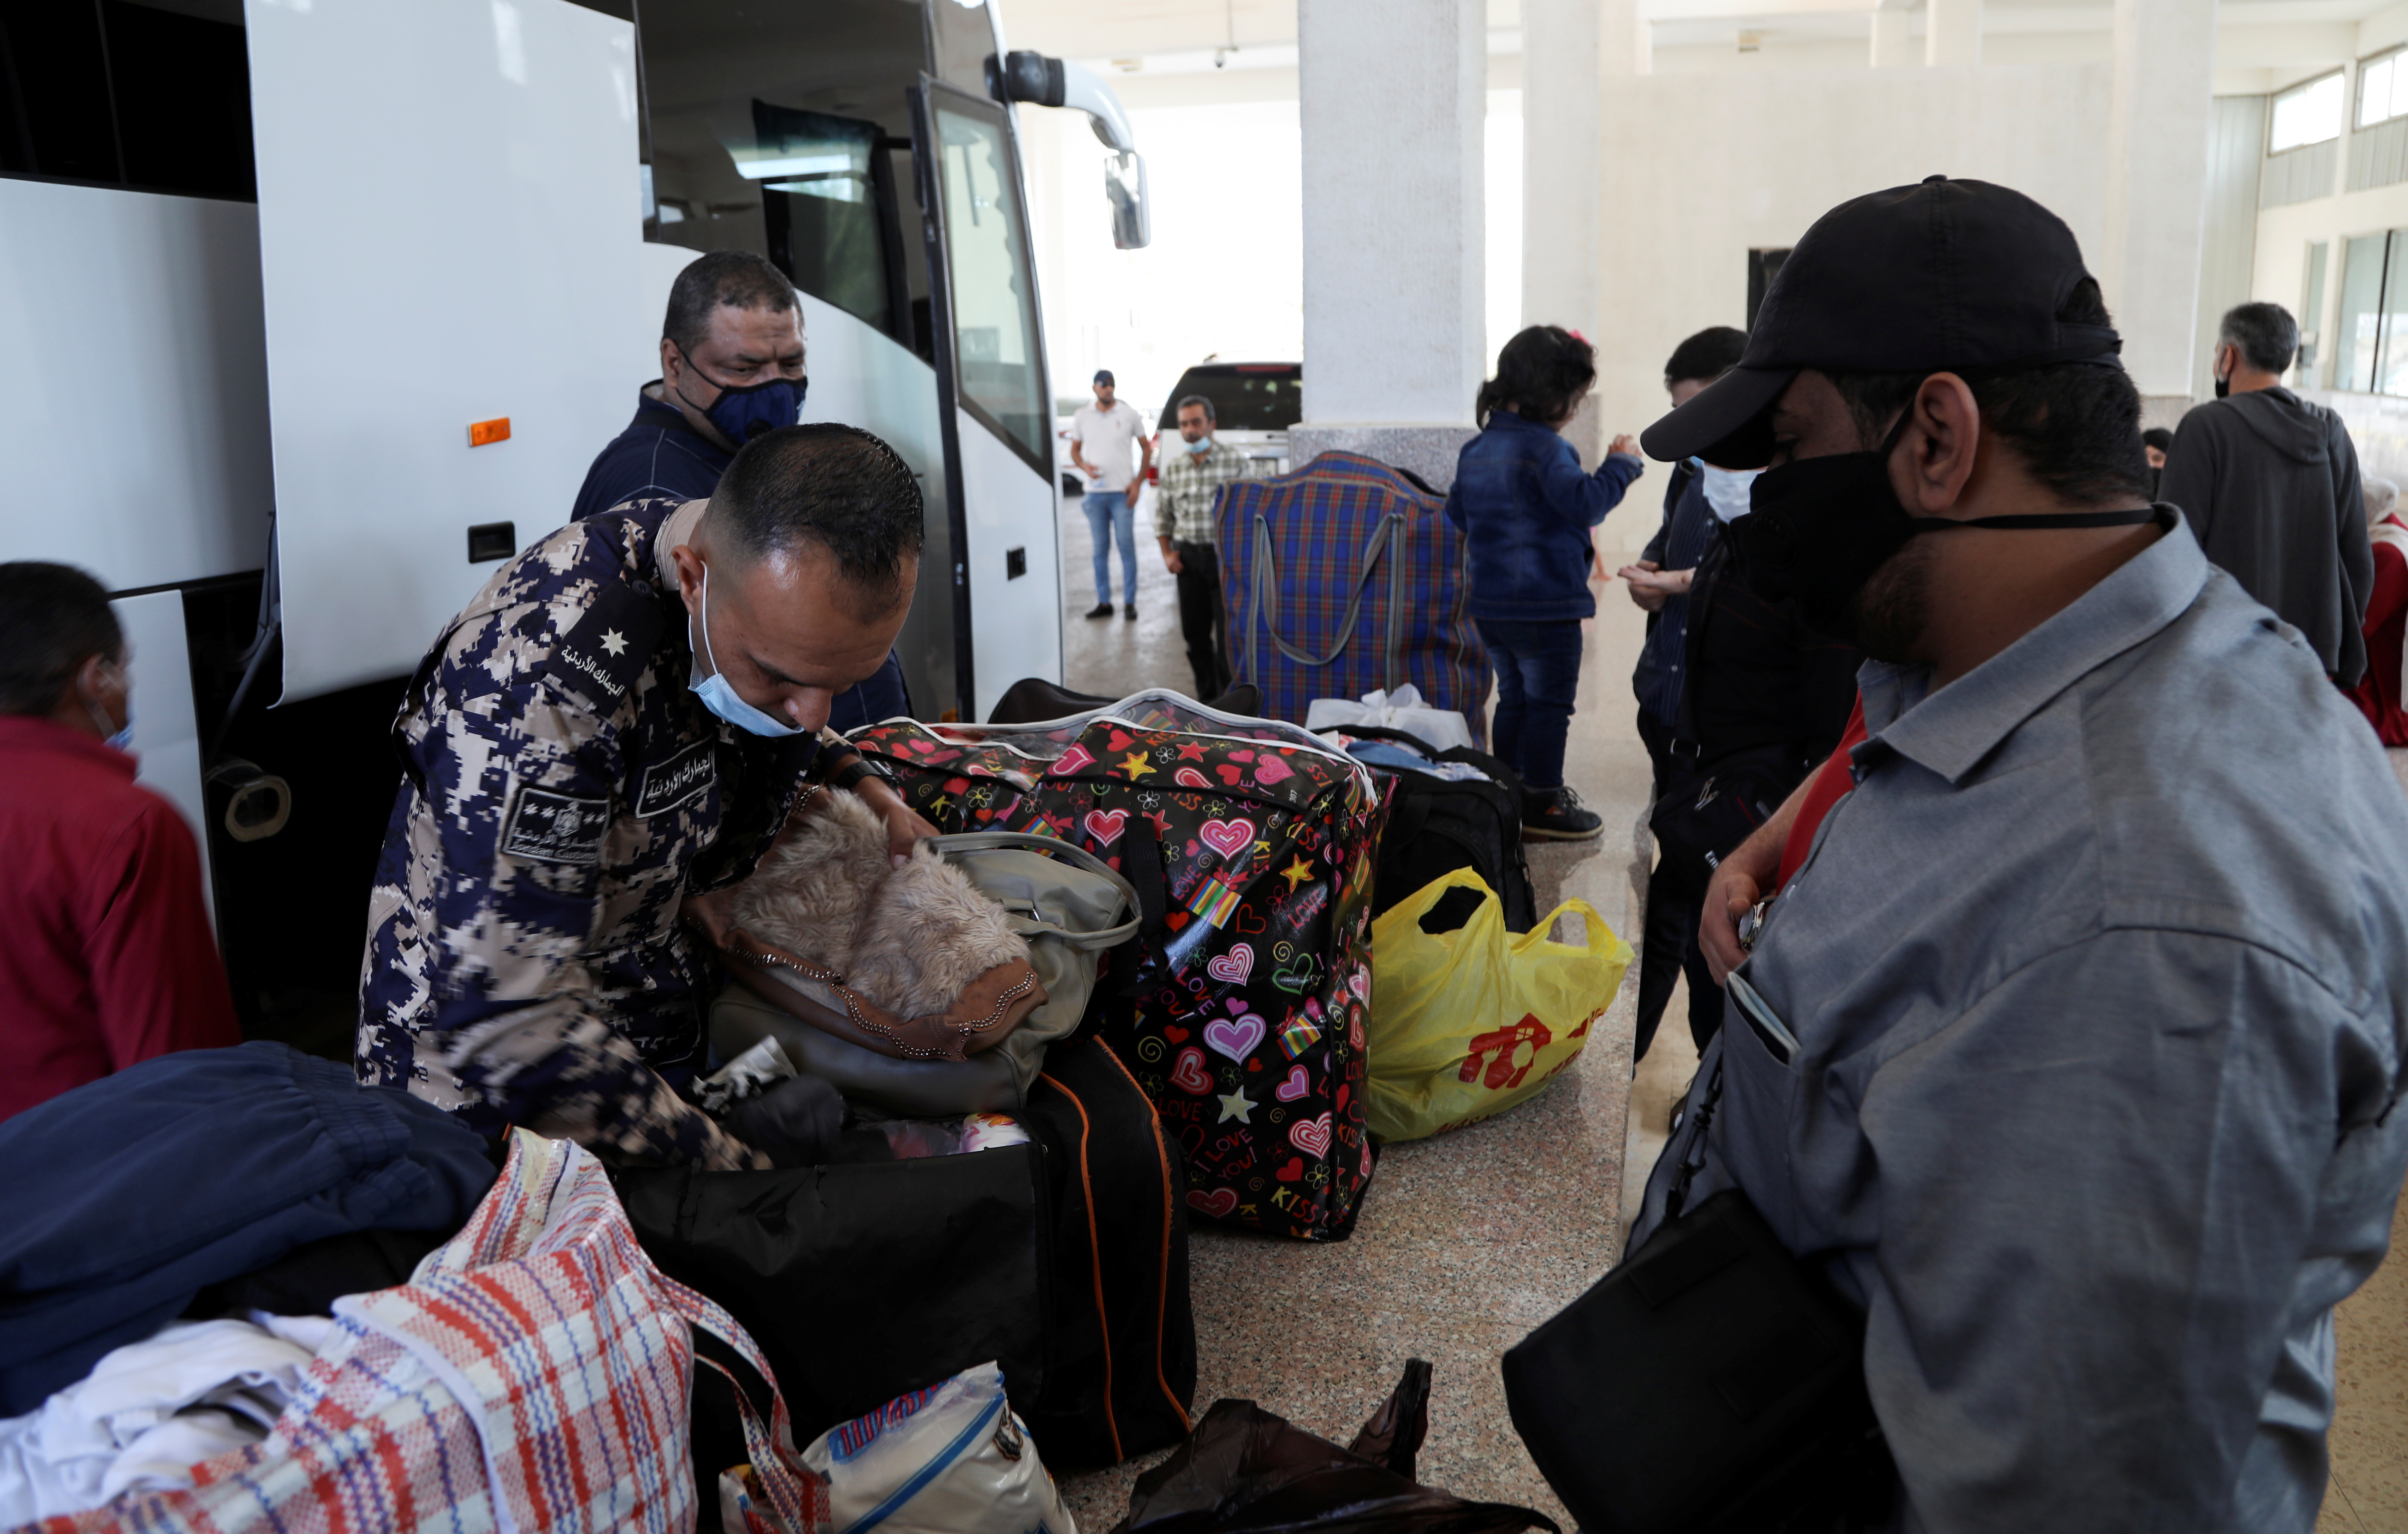 A customs officer inspects travellers'  belongings at Jaber border crossing with Syria, near Mafraq